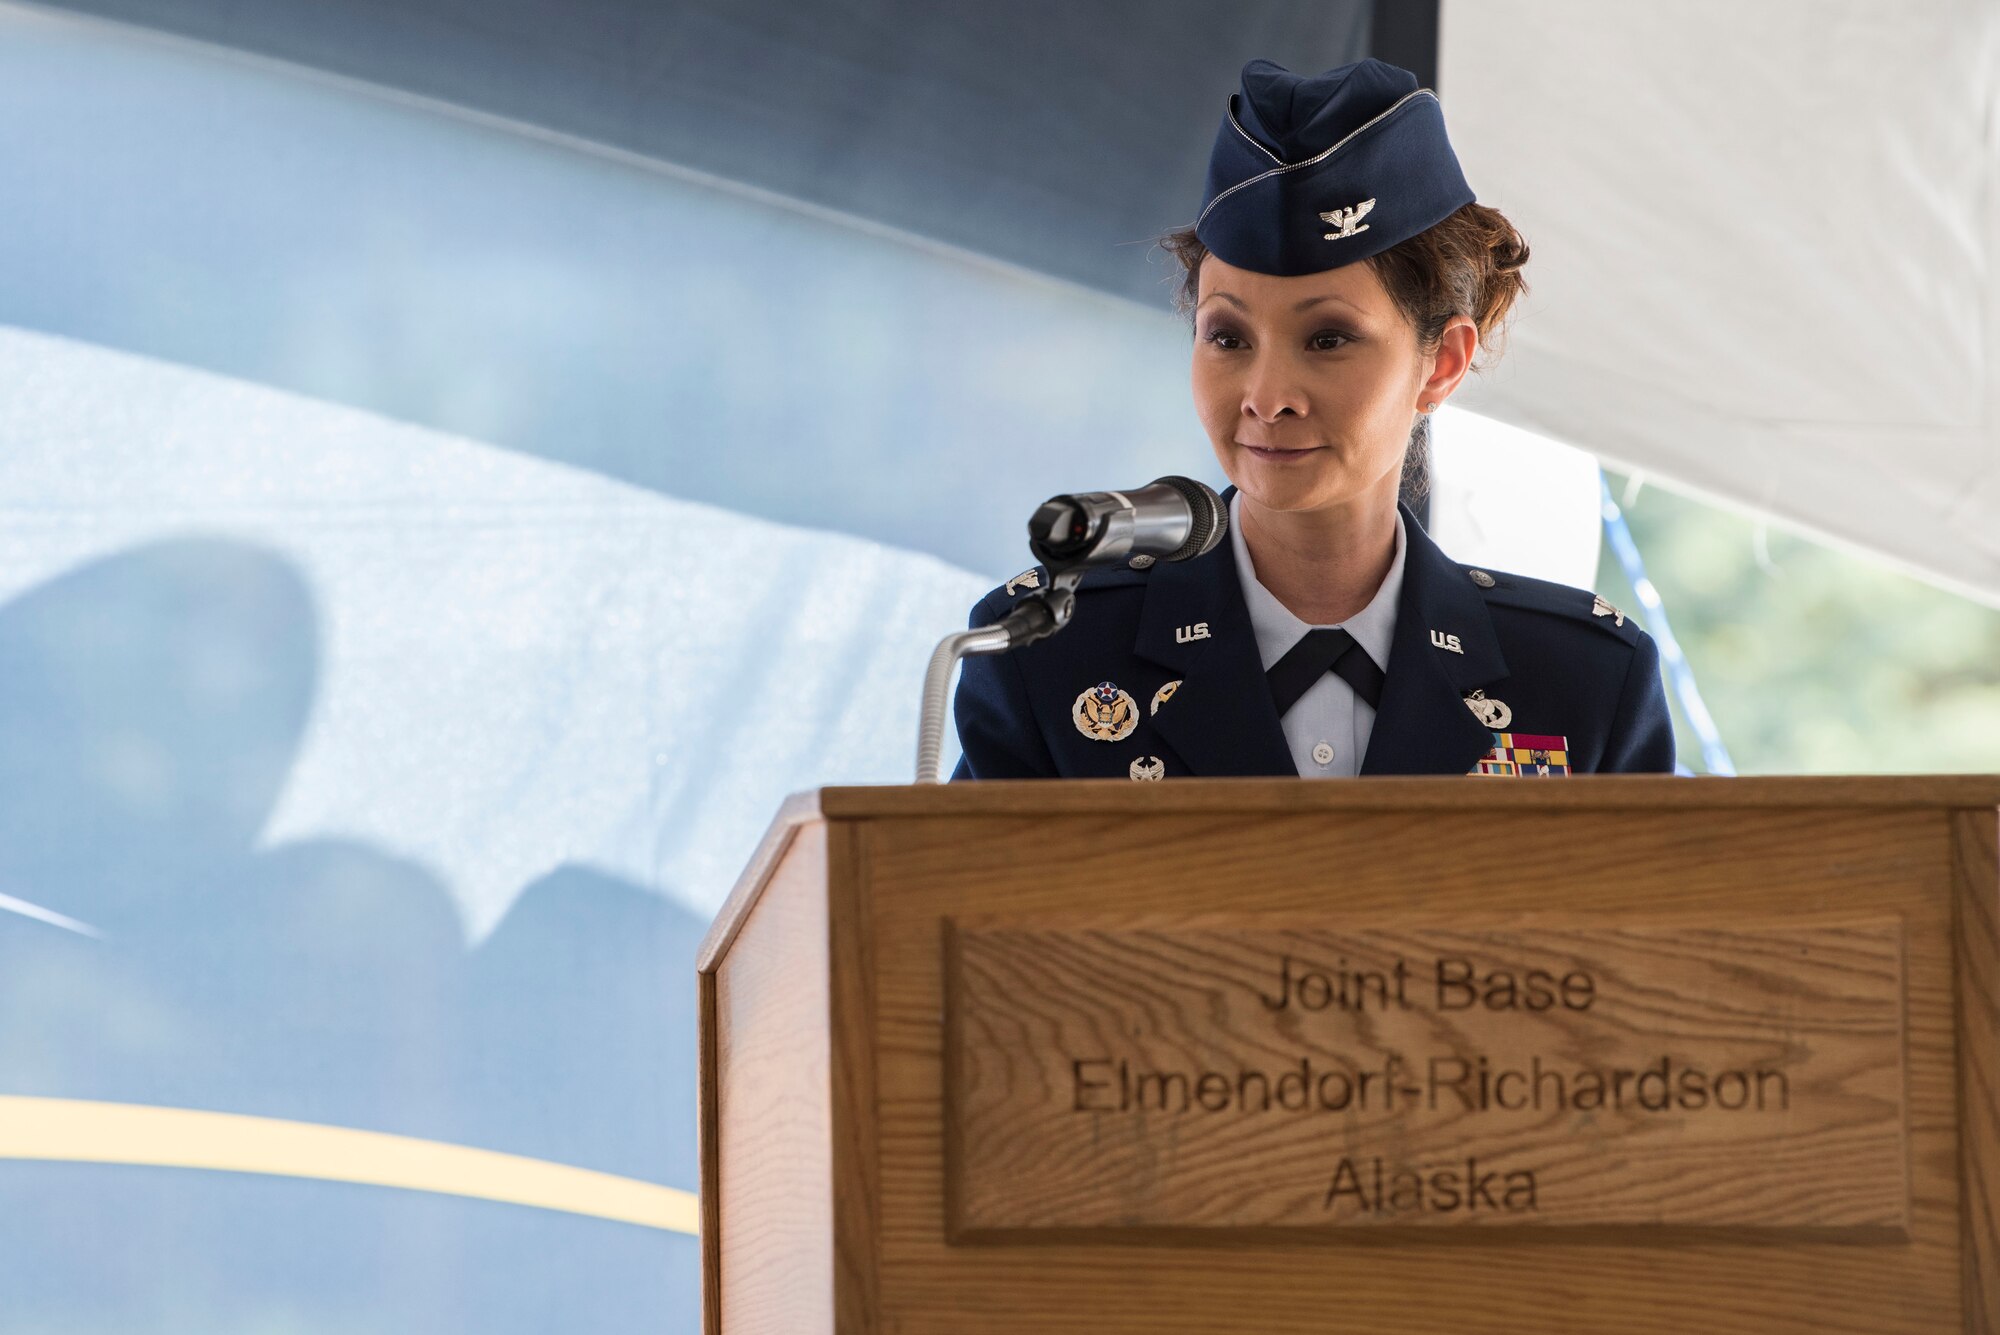 U.S. Air Force Col. Patricia Csànk, 673d Air Base Wing commander and Joint Base Elmendorf-Richardson commander, speaks during the opening ceremony for Fisher House II at JBER, Alaska, Sep. 10, 2018. The opening ceremony featured an array of key speakers, the 9th Army Band, Air Force Honor Guard, a ribbon-cutting and a walk-through.